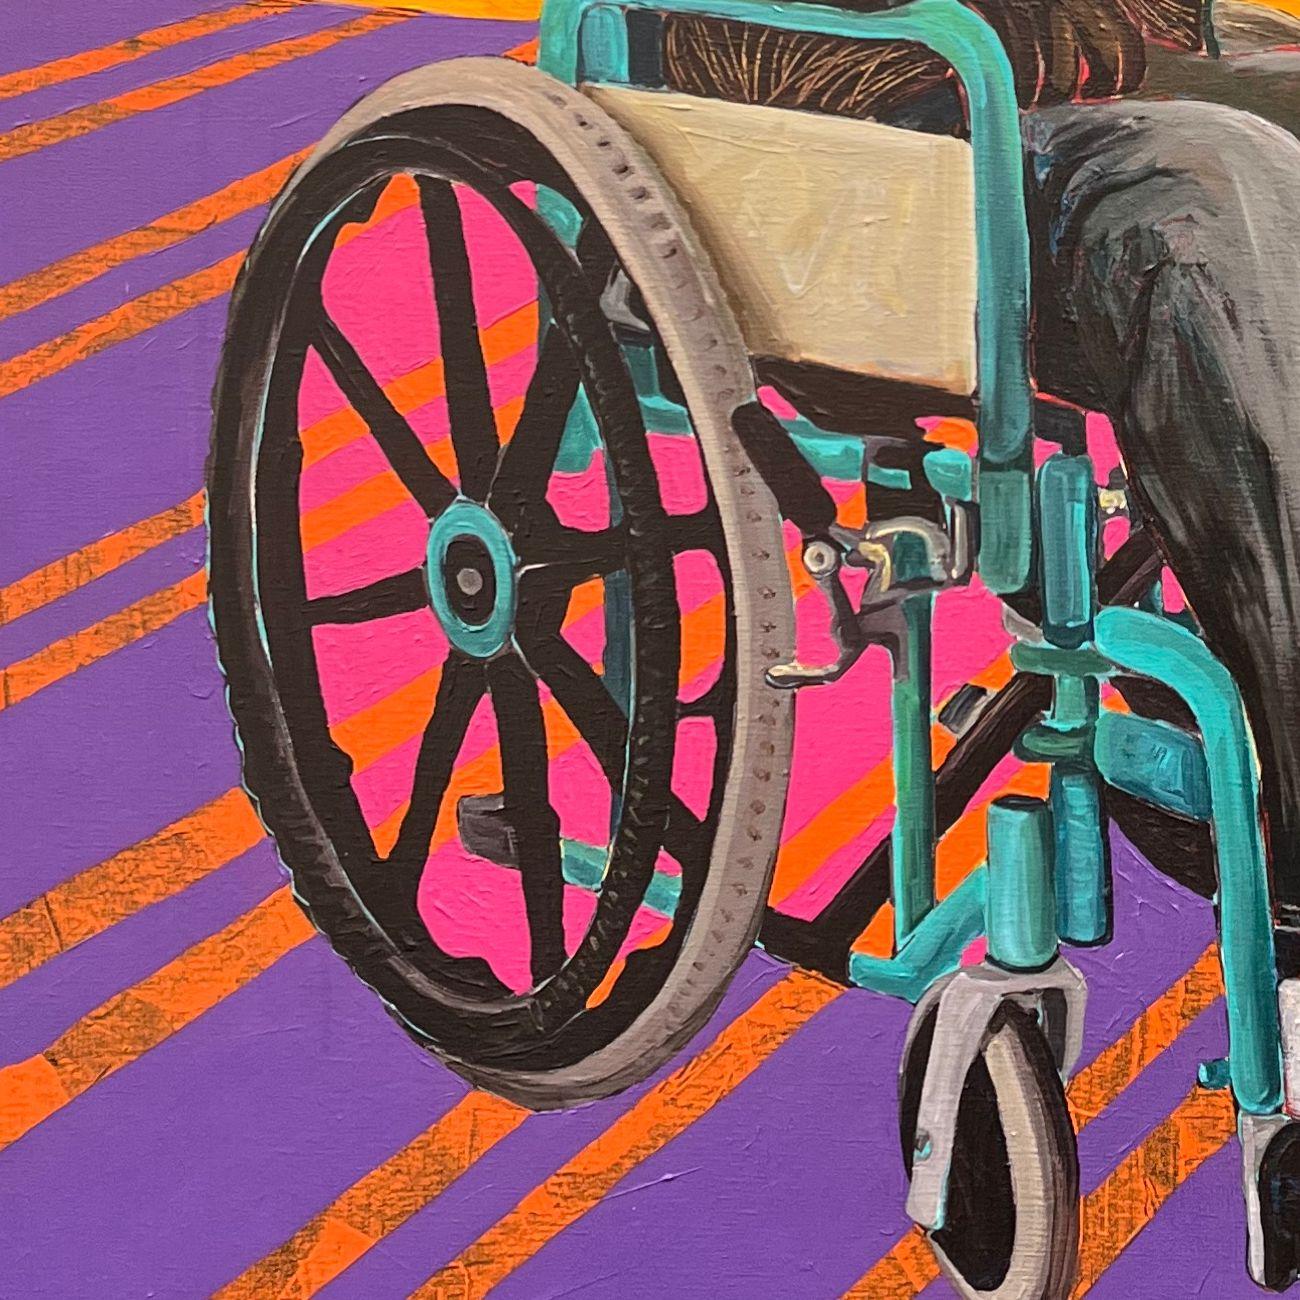 Boy In Wheelchair, 2022
by Collin Sekajugo
3D-print, silicon on canvas, mounted on Dibond
Signed and numbered by the artist on the back of the artwork
Edition of 35
Framed (Wood)
In mint condition (as acquired from the publisher)

Ugandan-Rwandan